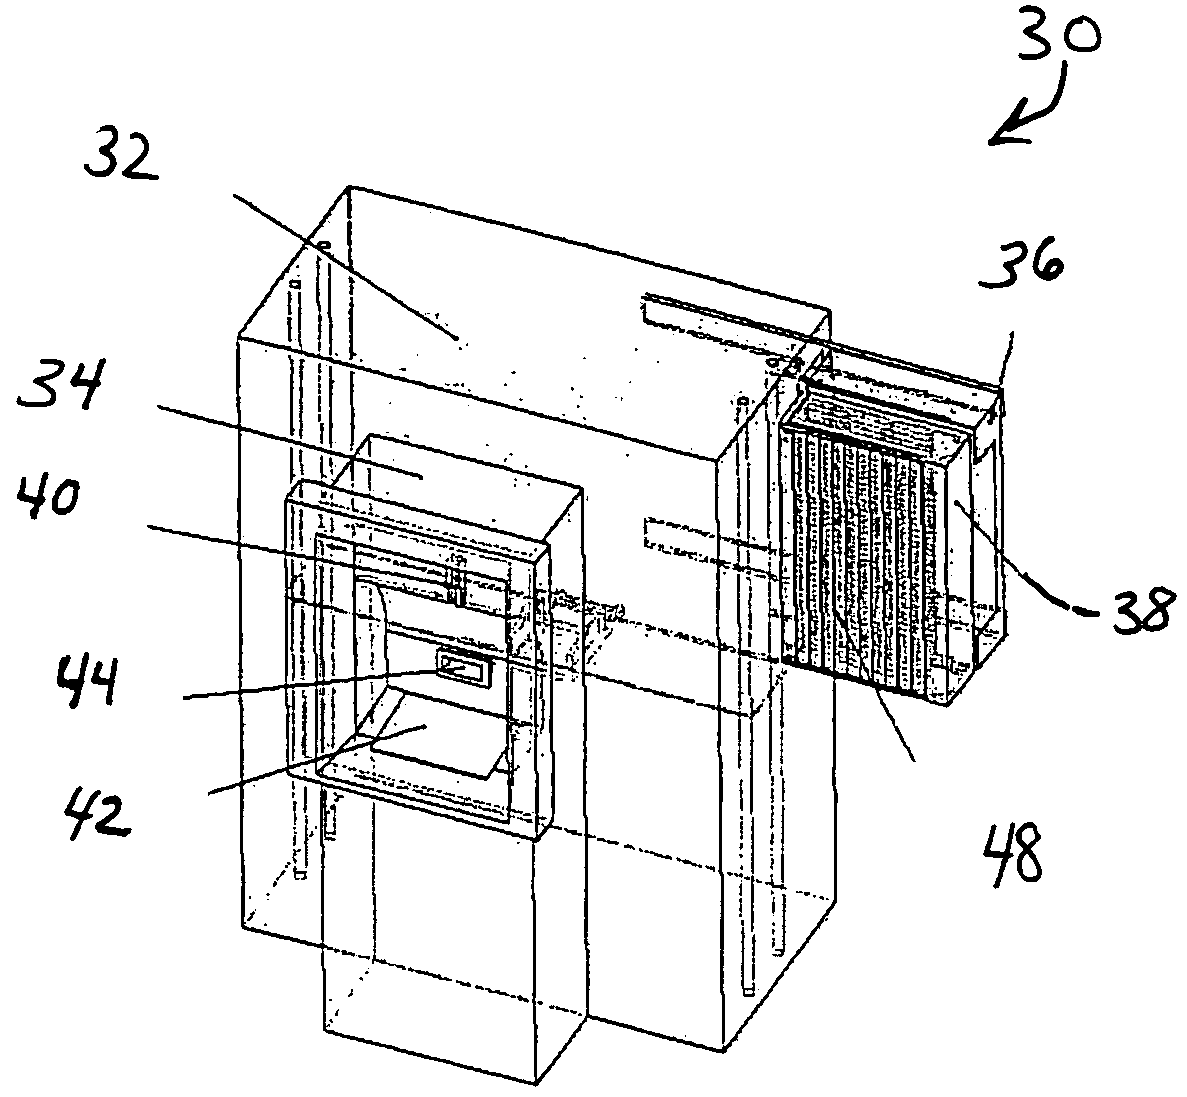 Article dispensing system and method for same